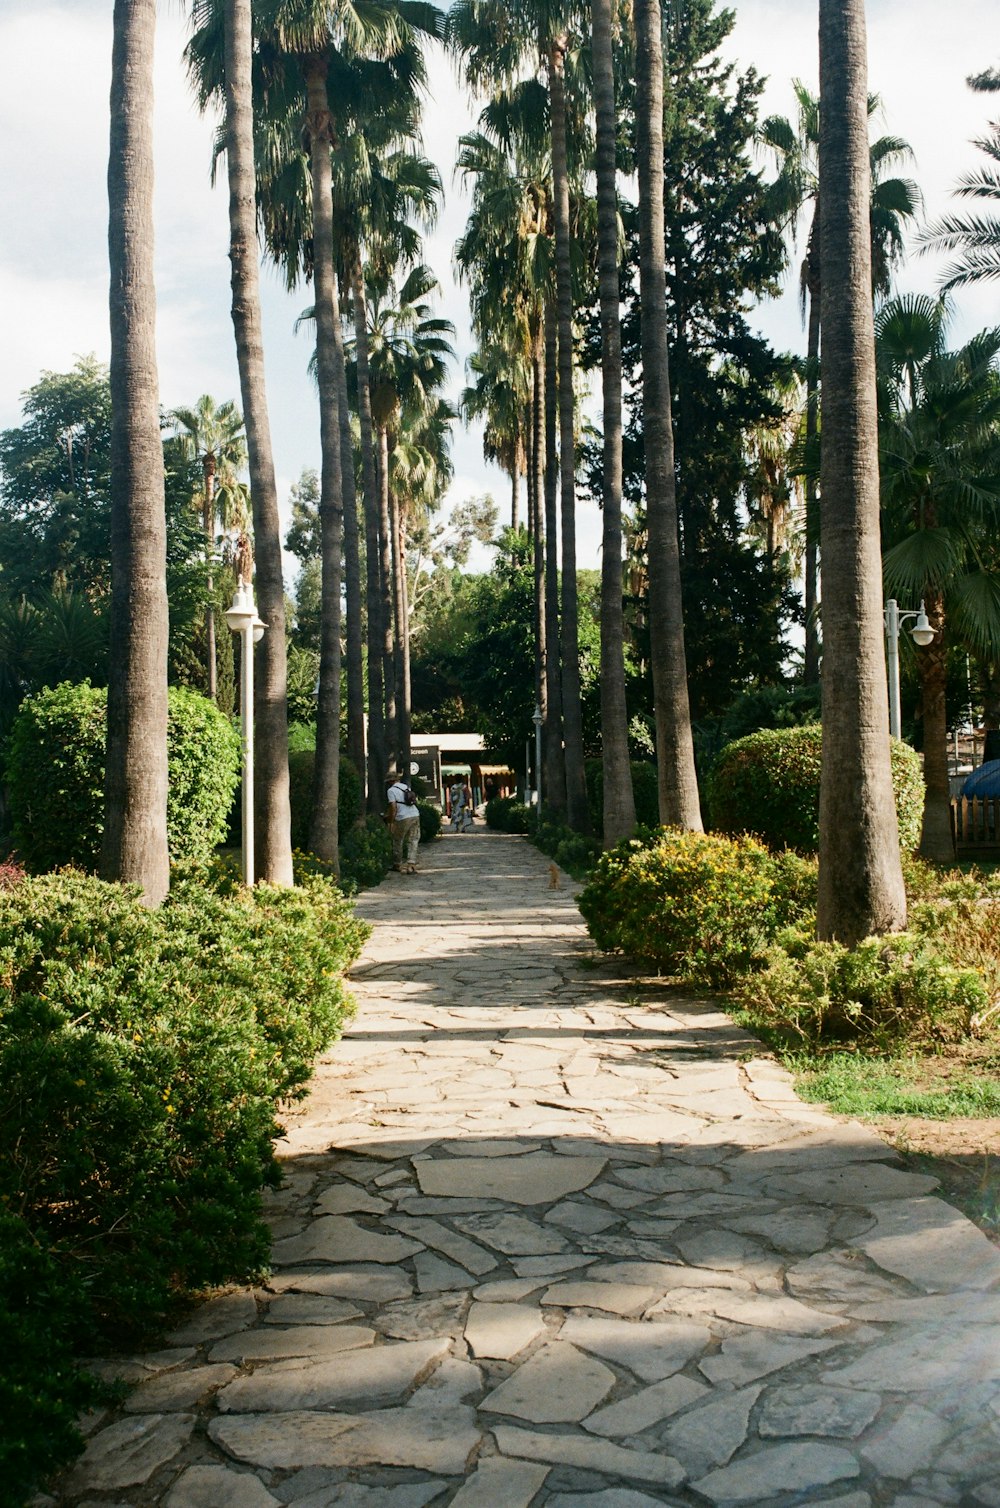 a stone path with palm trees lining the sides of it